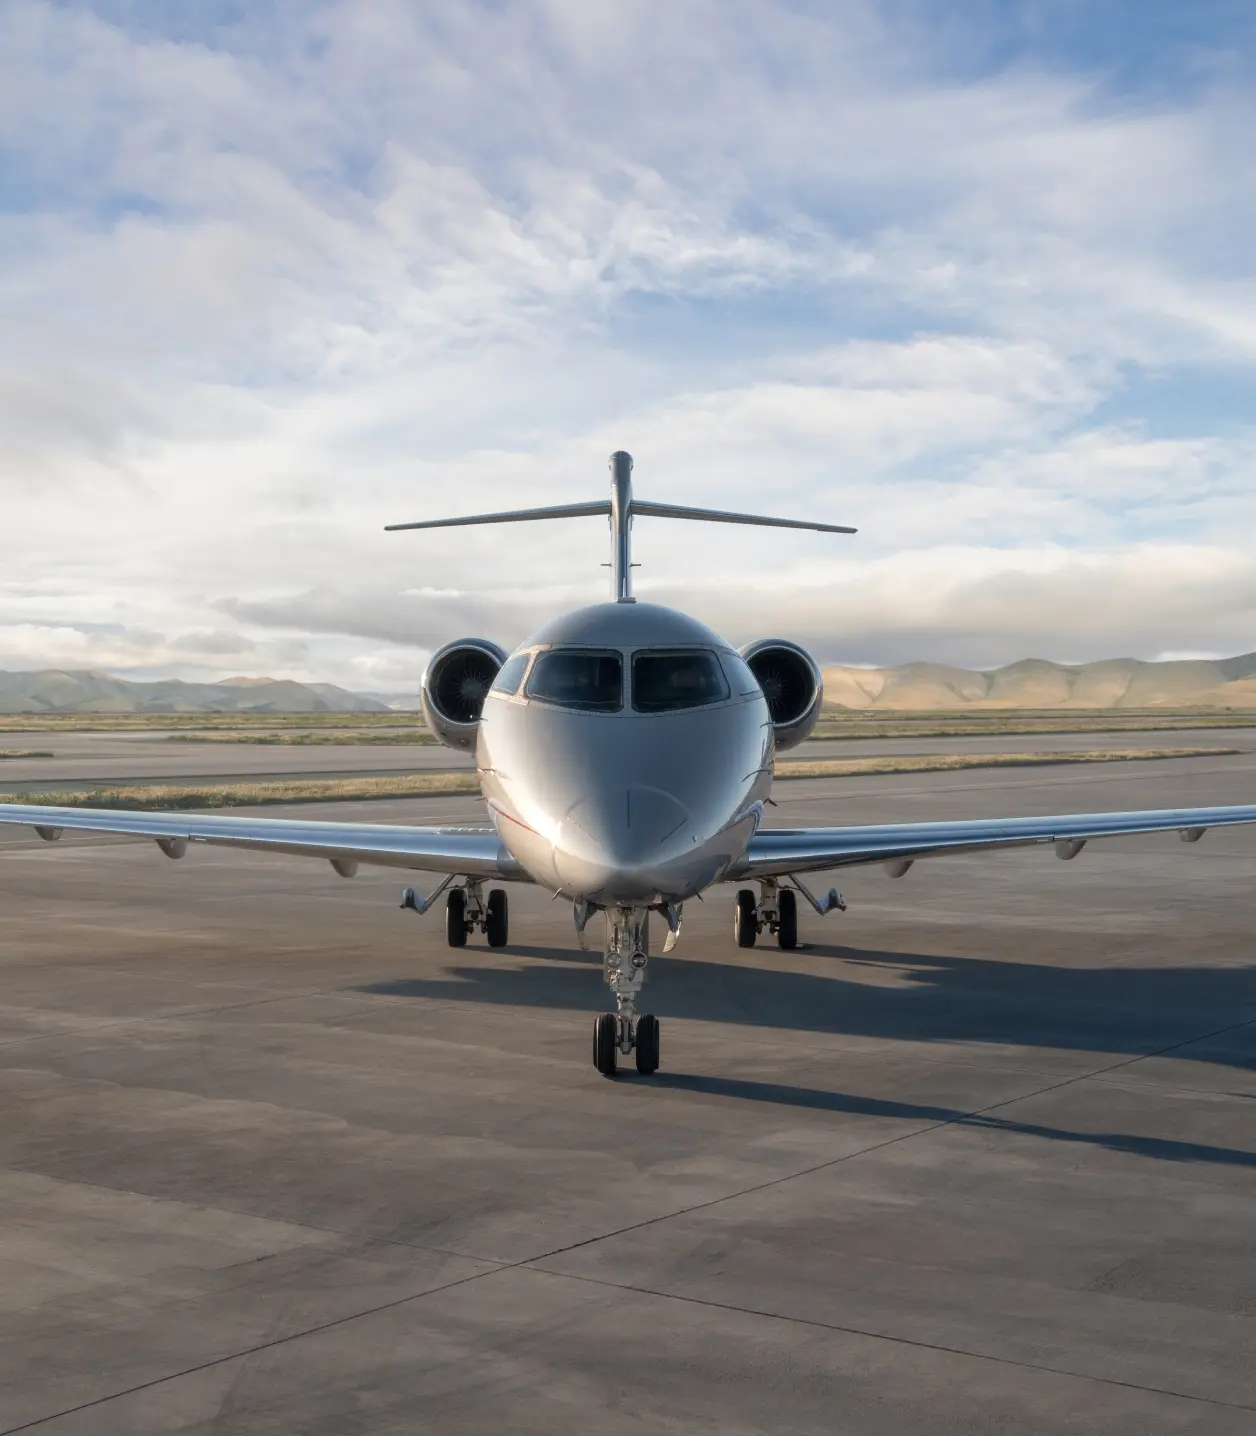 Front view of Global 7500